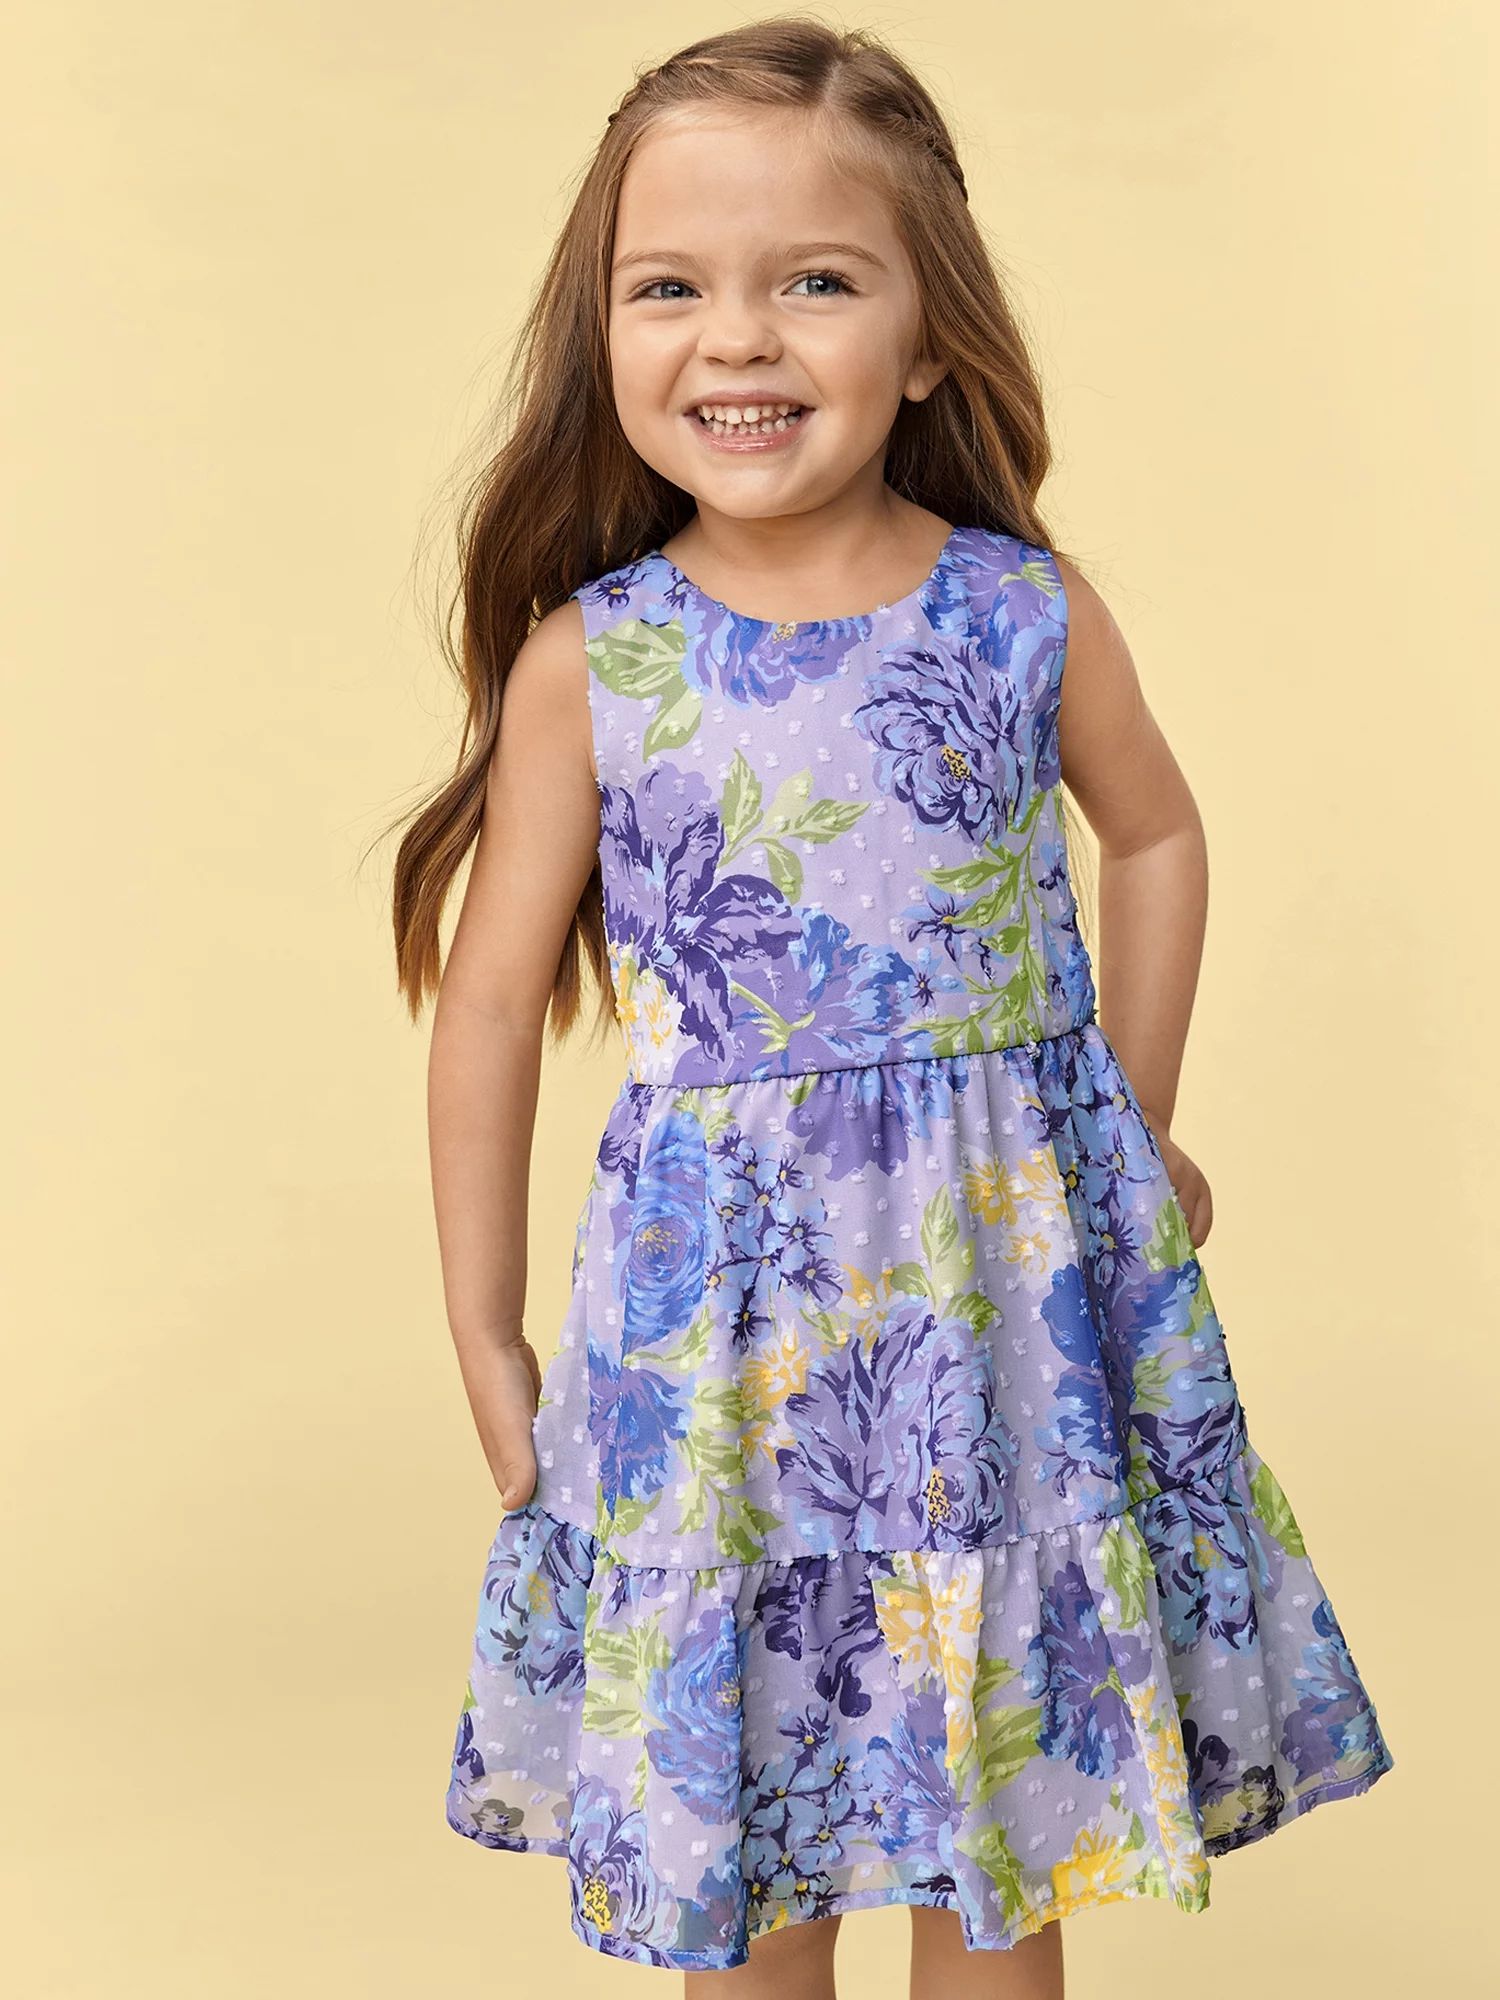 The Children's Place Toddler Girl Tiered Dress, Sizes 12M-5T | Walmart (US)